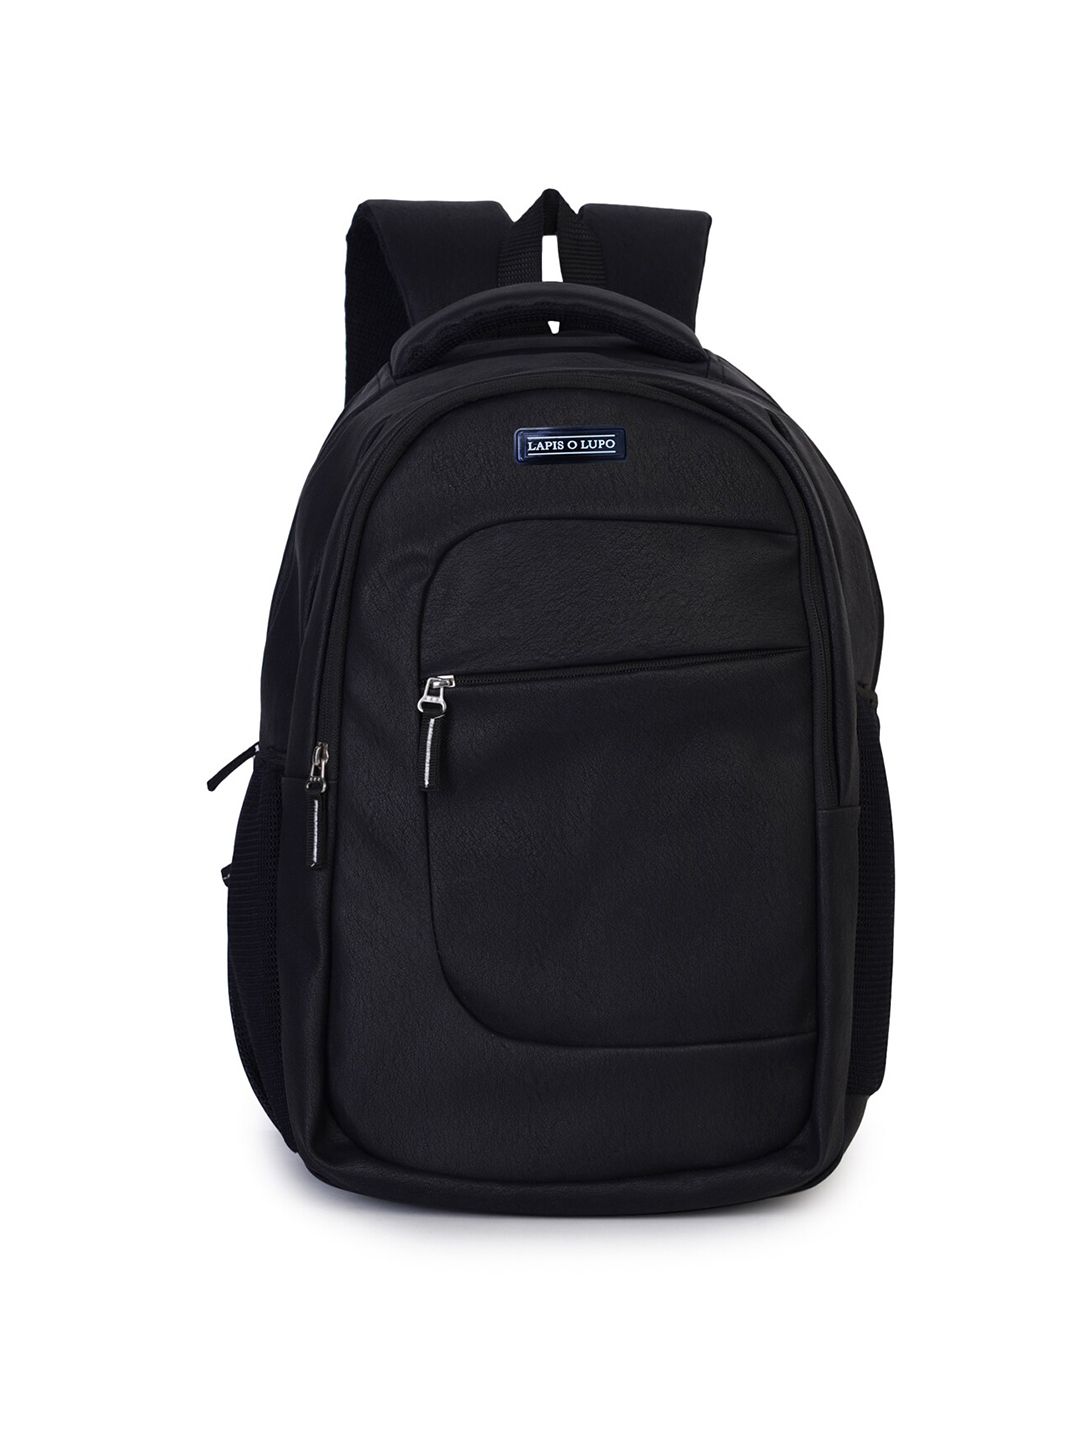 Lapis O Lupo Black Solid Backpack Price in India